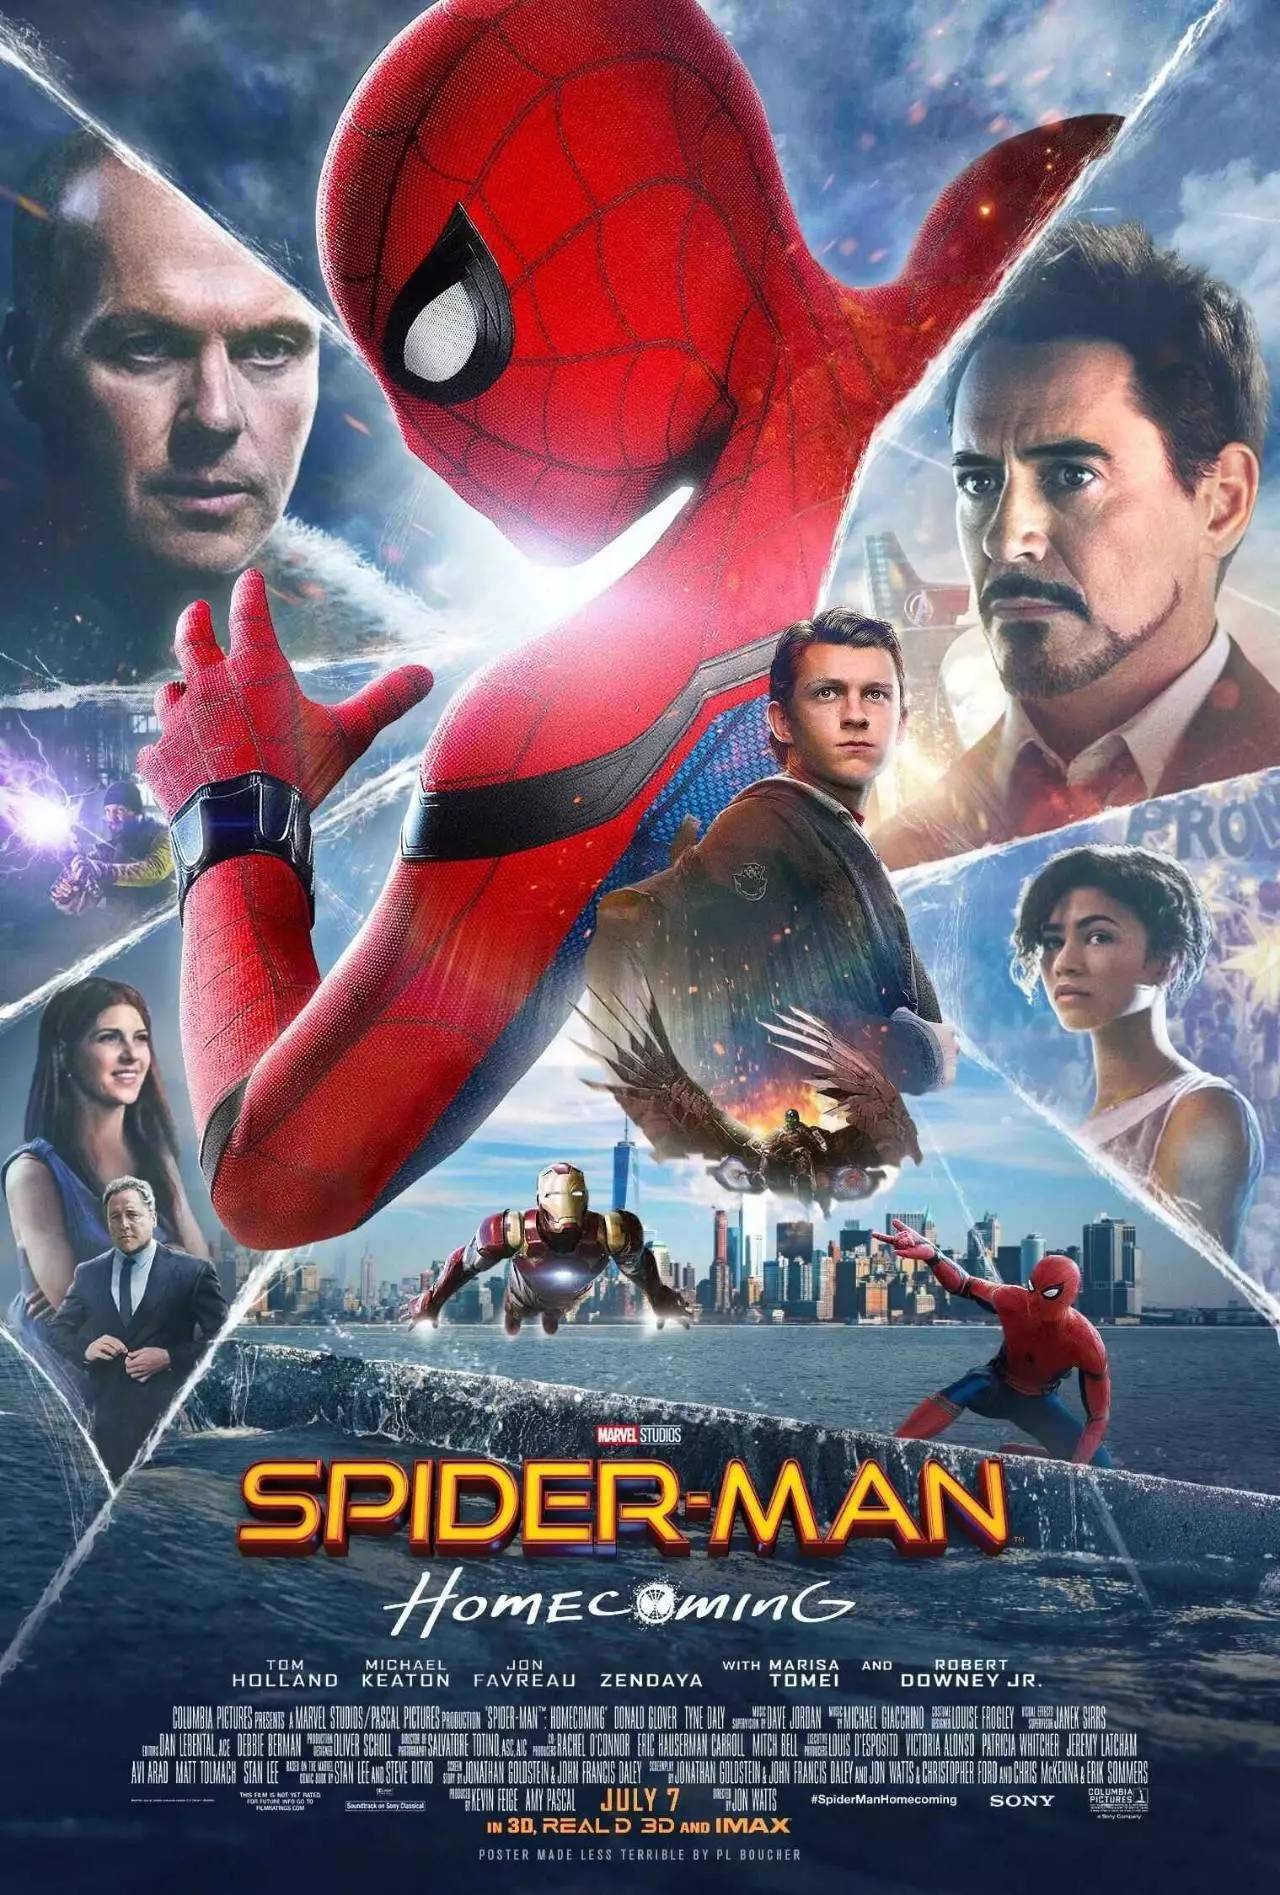 Spiderman Poster New Movie 2017 HOMECOMING Marvel Film FREE P+P CHOOSE YOUR SIZE 